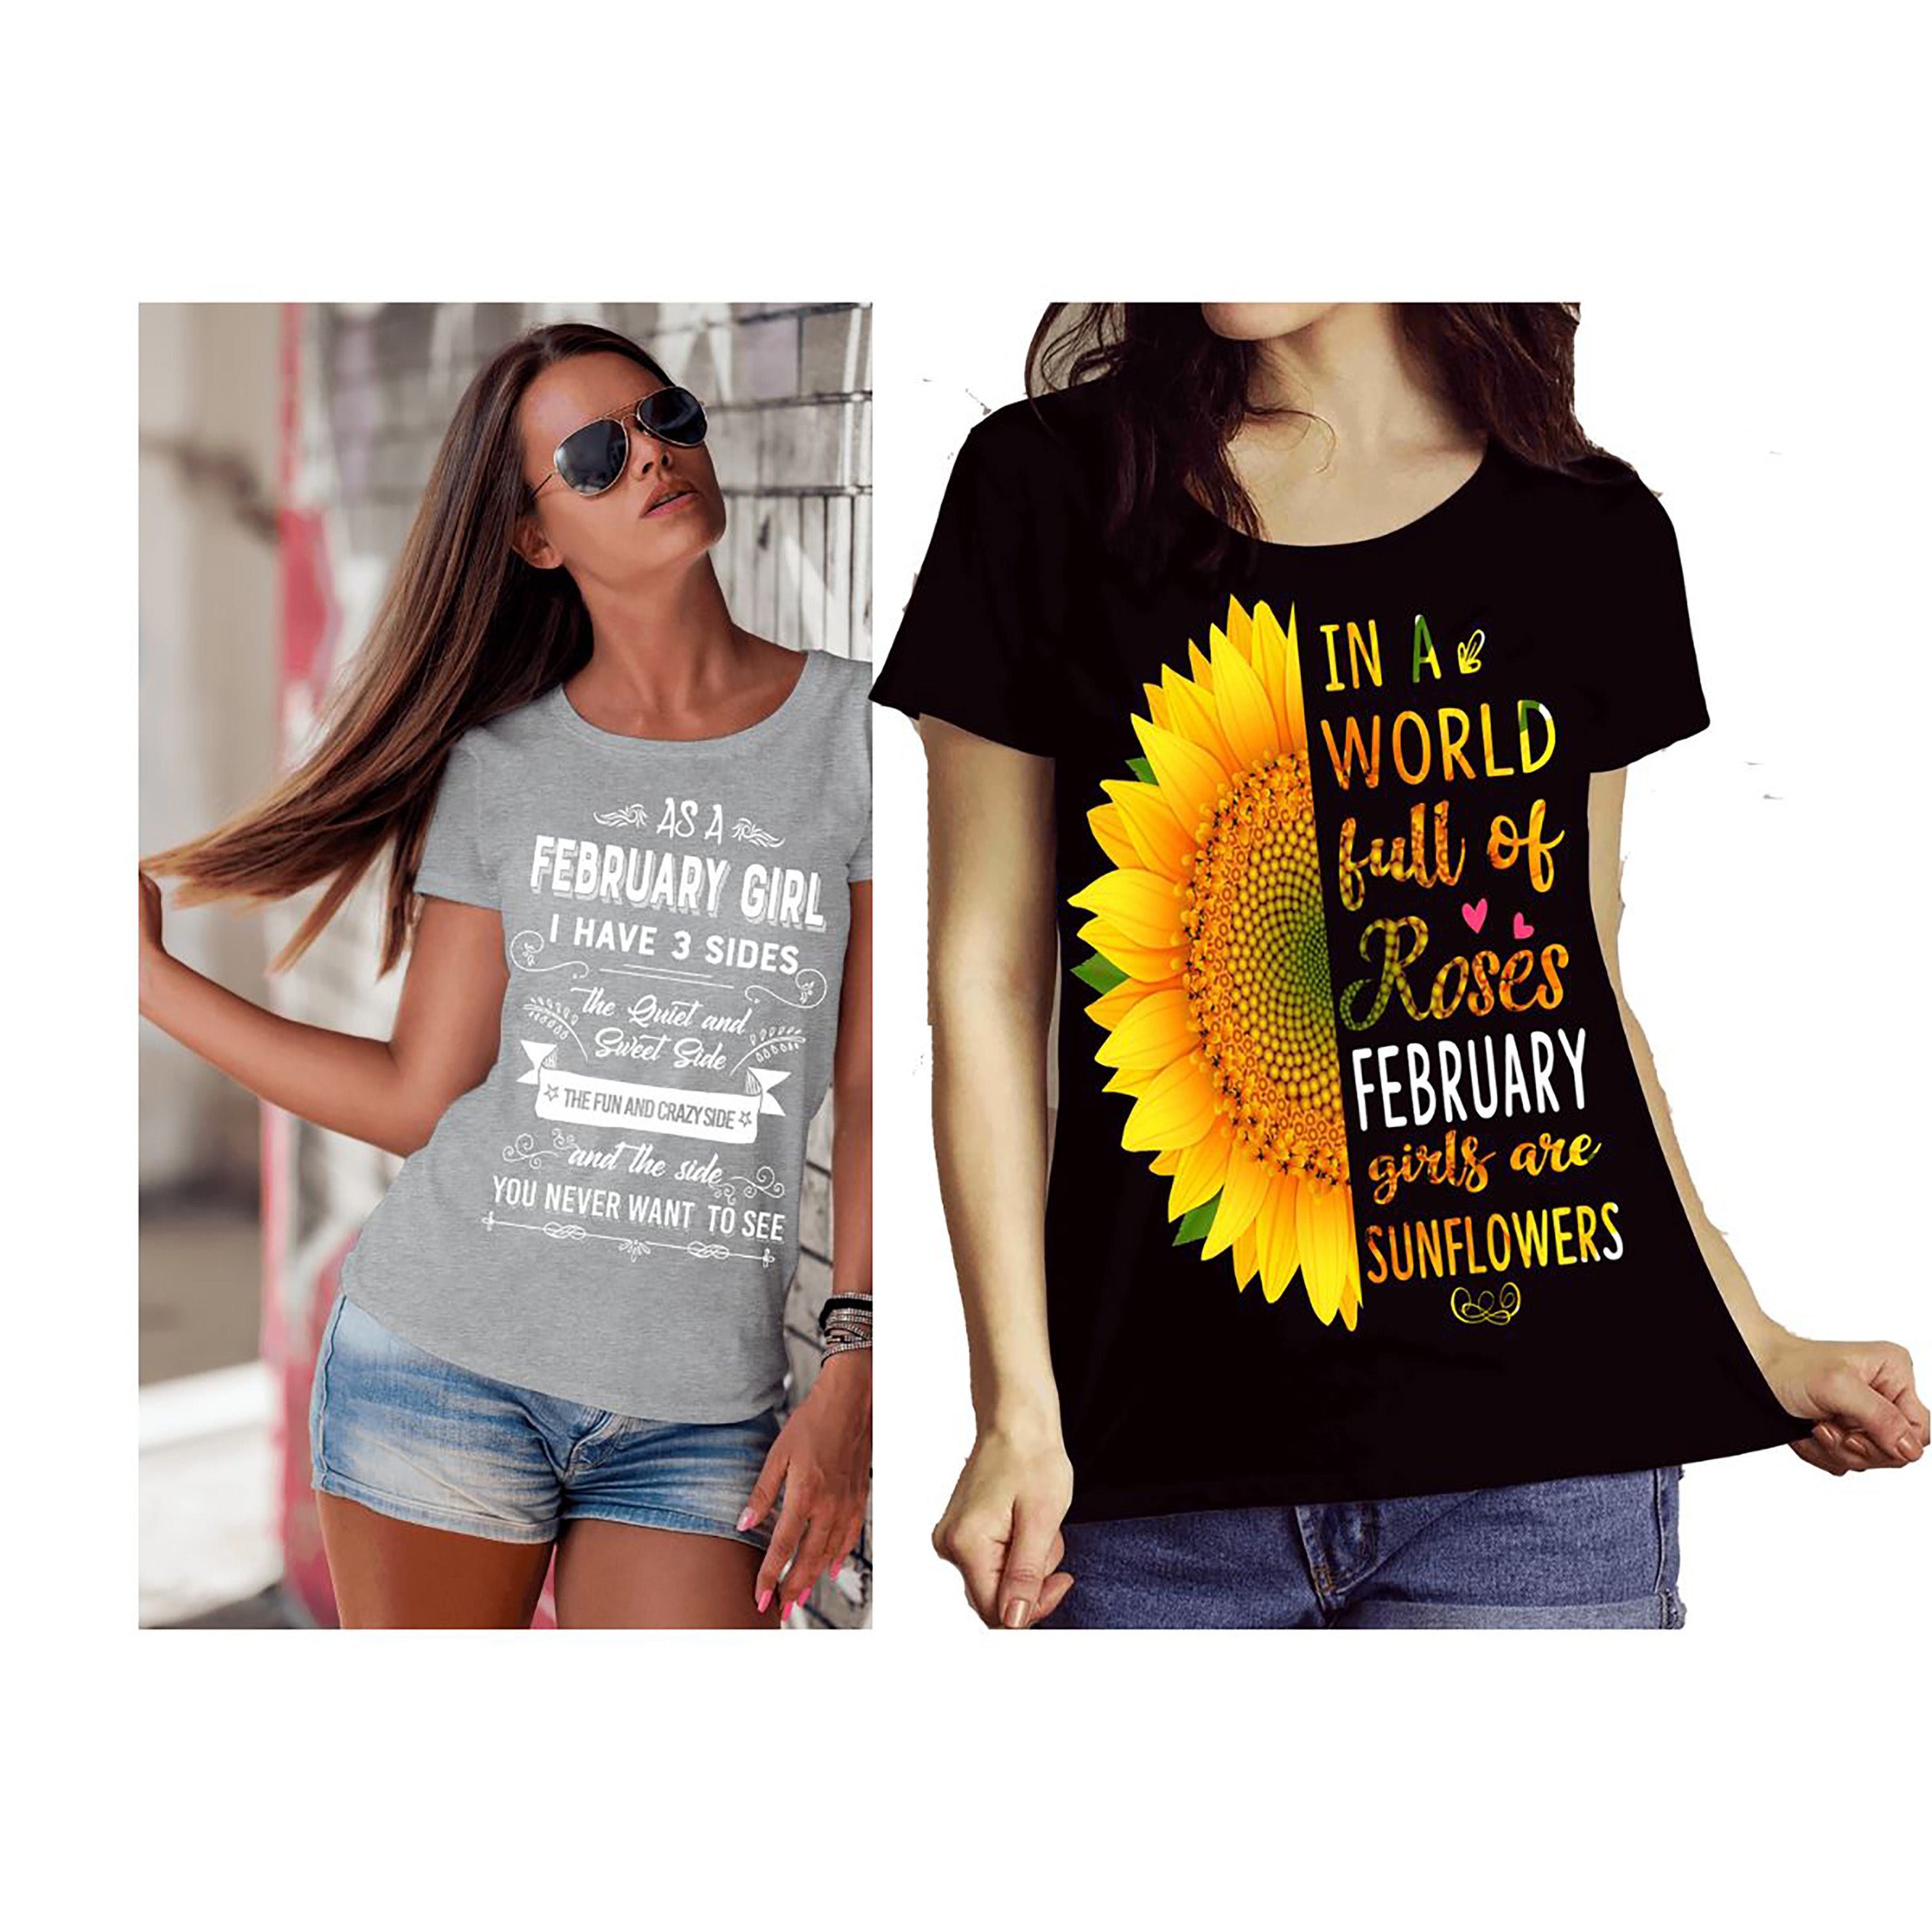 "February Combo (Sunflower And 3 Sides)" Pack of 2 Shirts